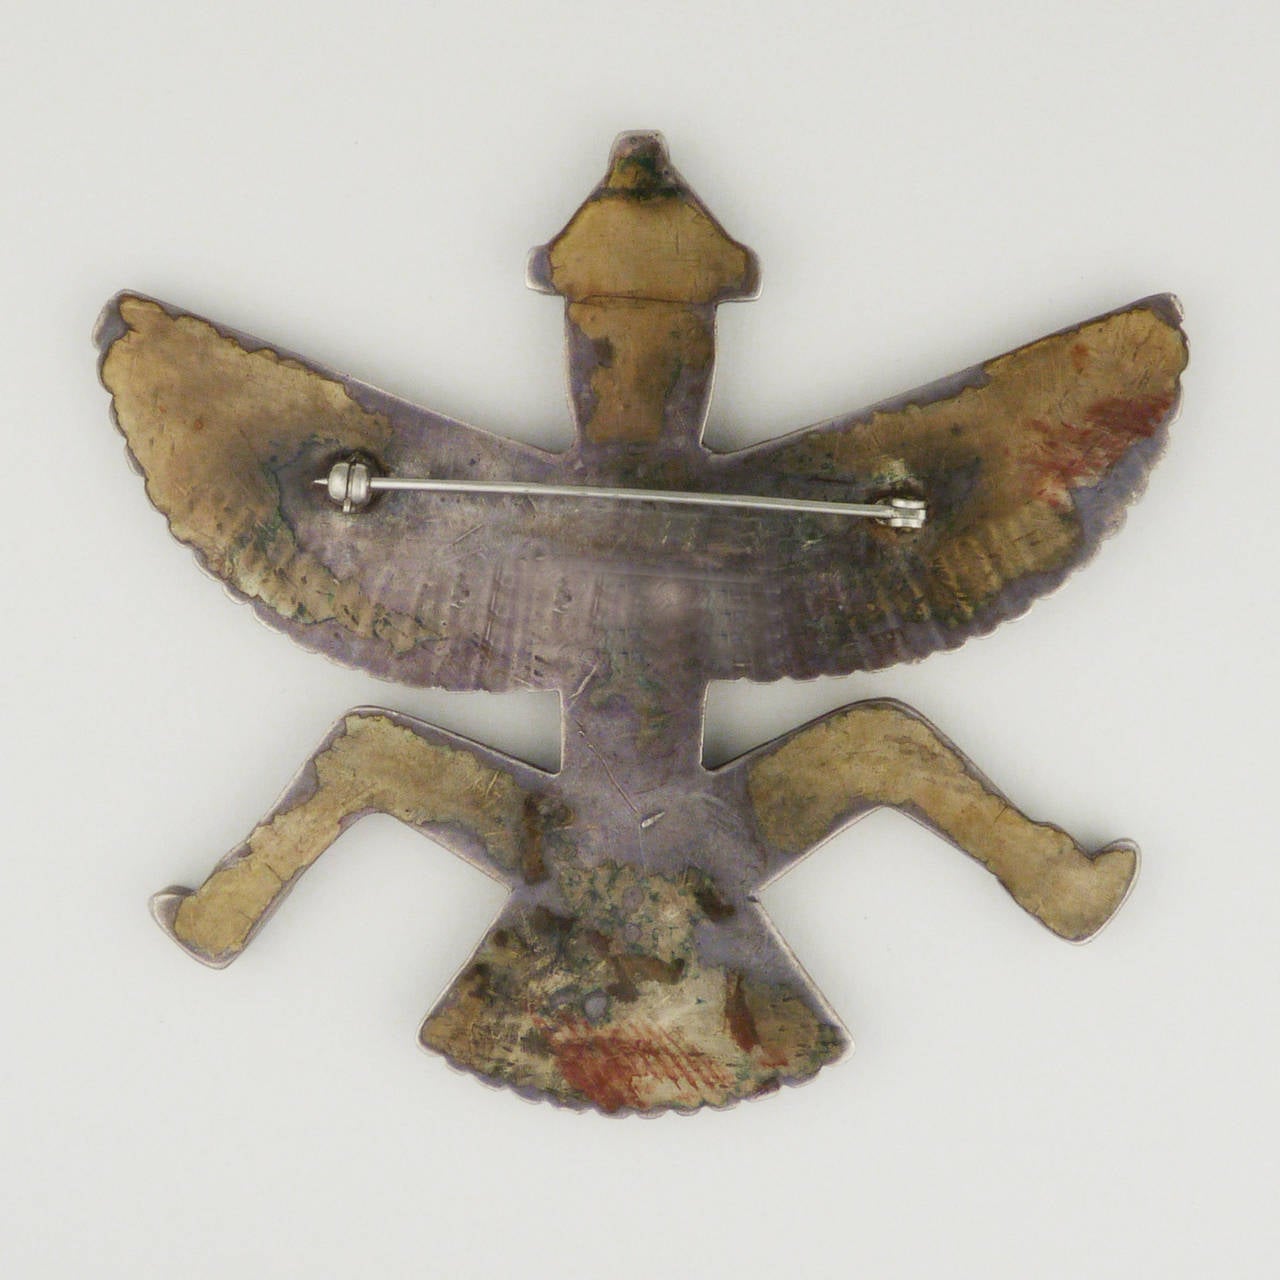 An exceptionally large and fine inlaid pin from Zuni Pueblo, made of spiny oyster, turquoise, jet, white clam shell and sterling silver. This pin represents Knifewing, the Zuni god of war. This symbol was worn by warriors to protect them in battle,